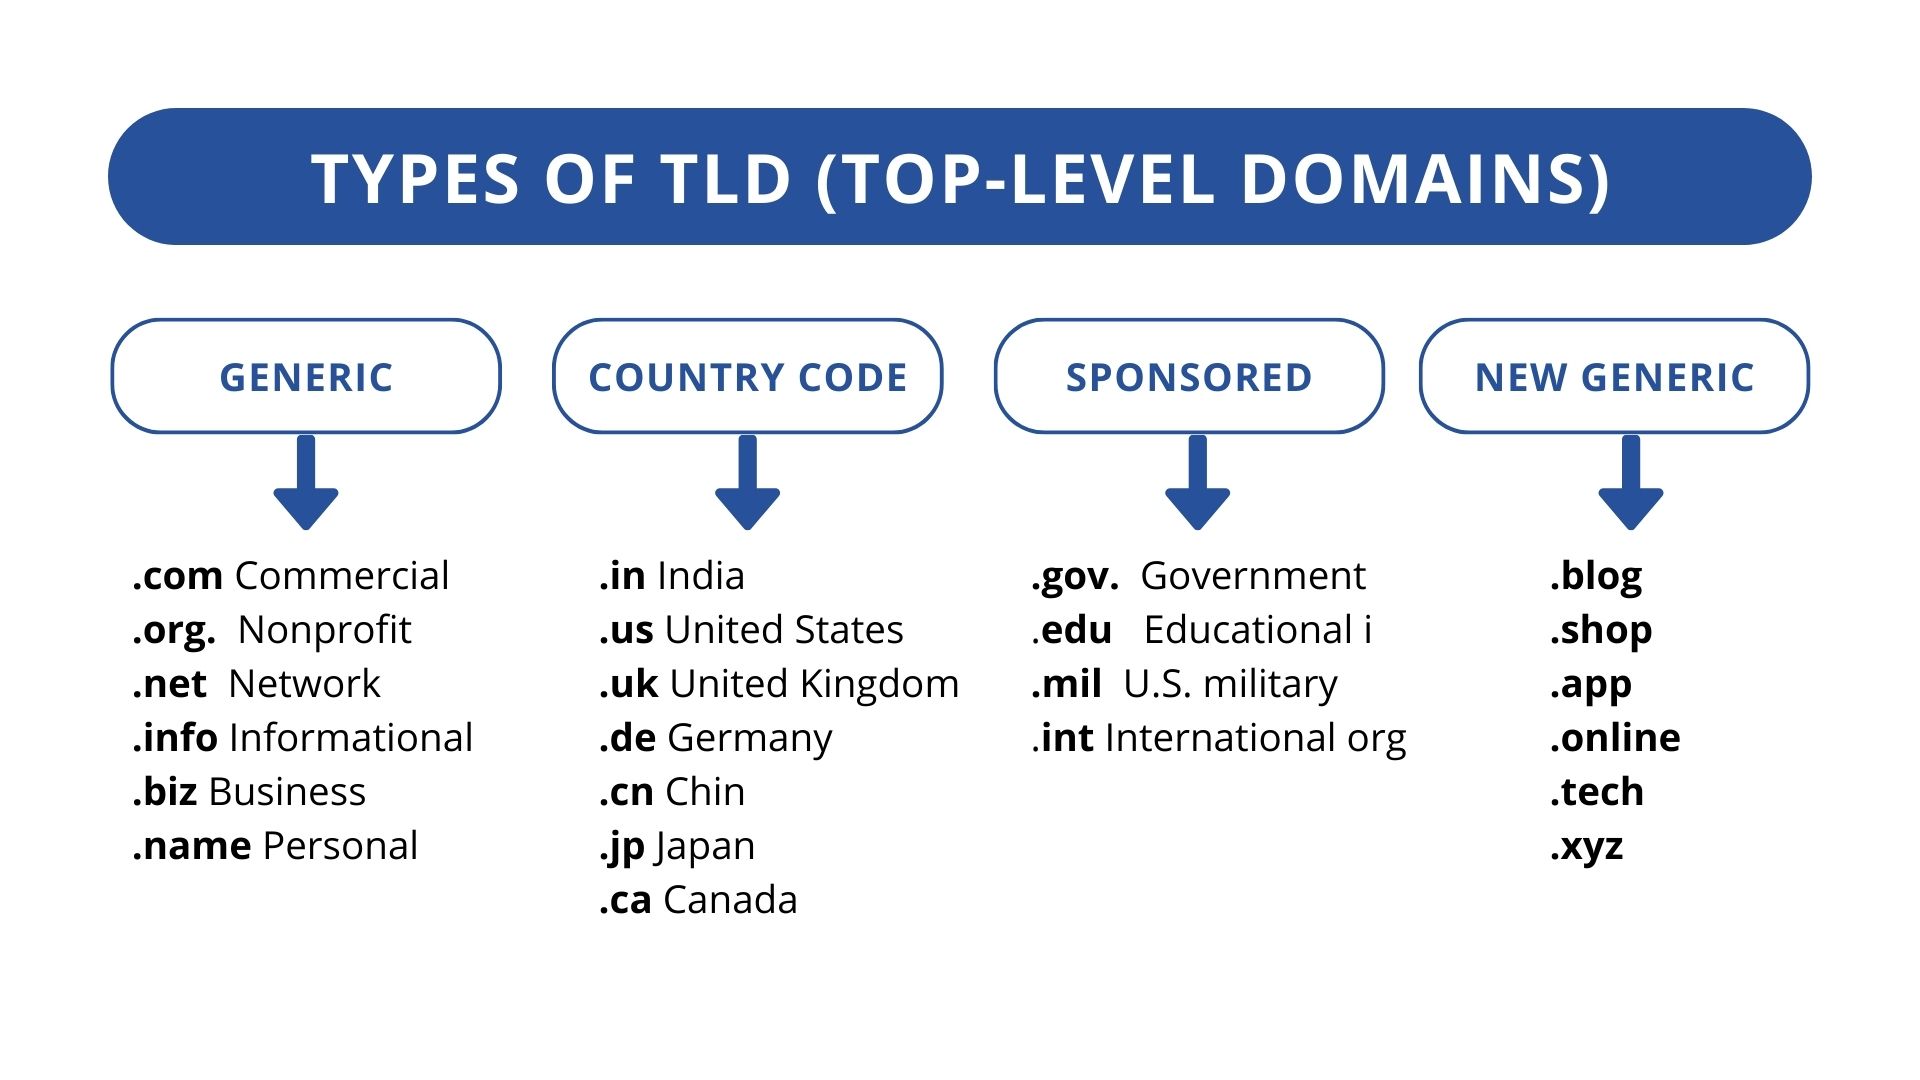 Types Of TLD